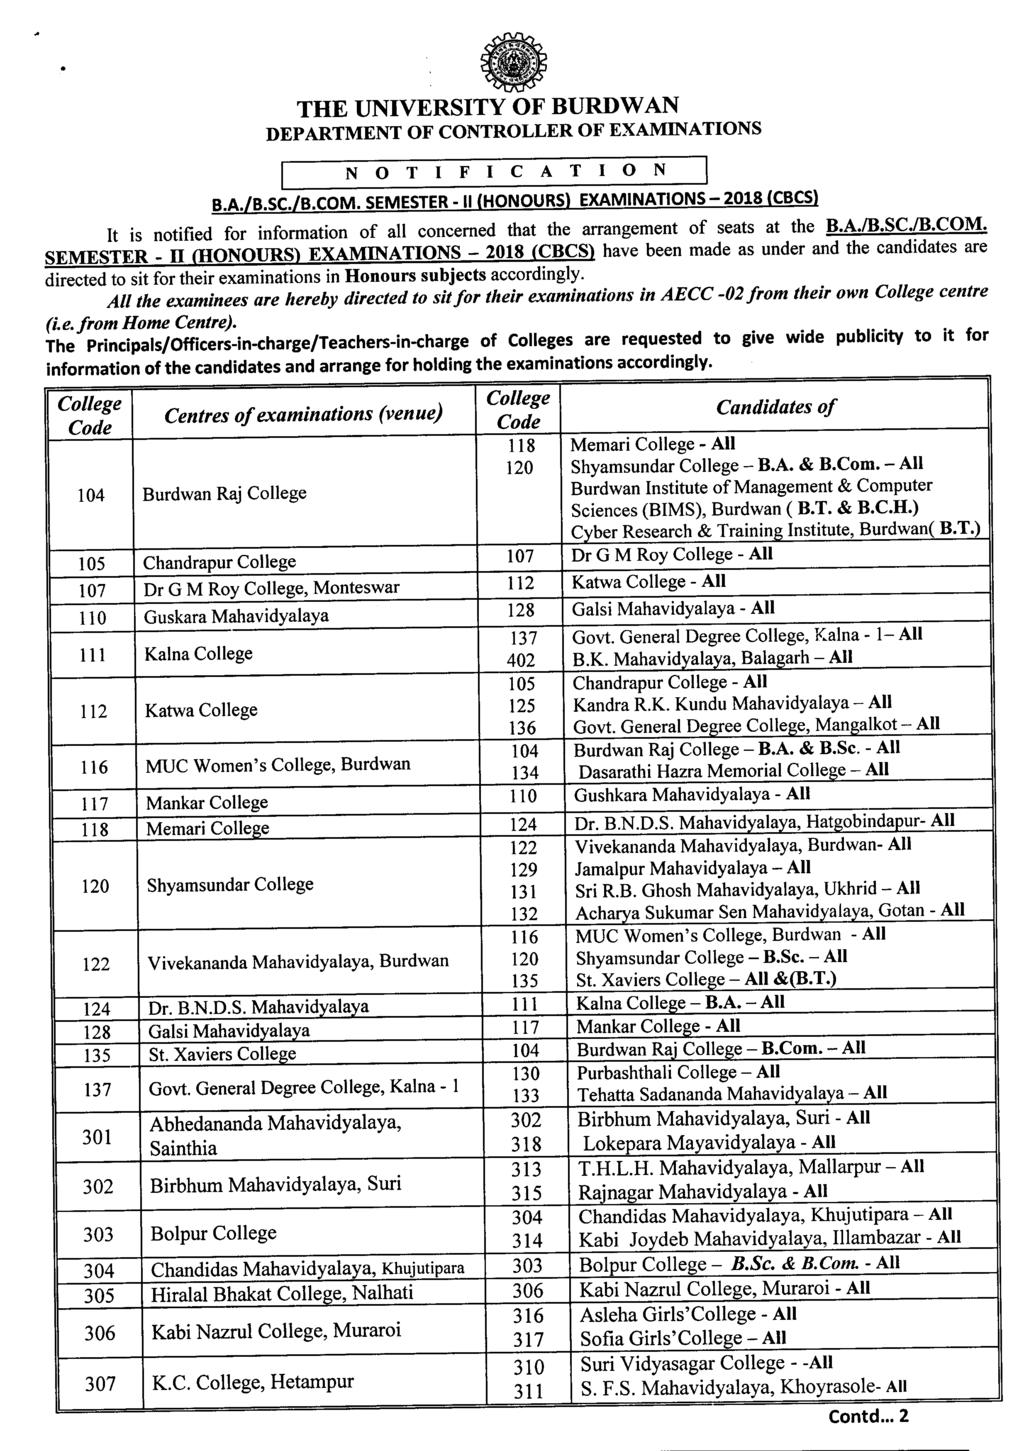 B.A./B.SC./B.COM. SEMESTER- II (HONOURS) EXAMINATIONS- 2018 (CBCS) B.A.IB.SC.IB.COM. SEMESTER _ II (HONOURS) EXAMINATIONS - 2018 (CBCS) have been made as under and the candidates are directed to sit for their examinations in Honours subjects accordingly.